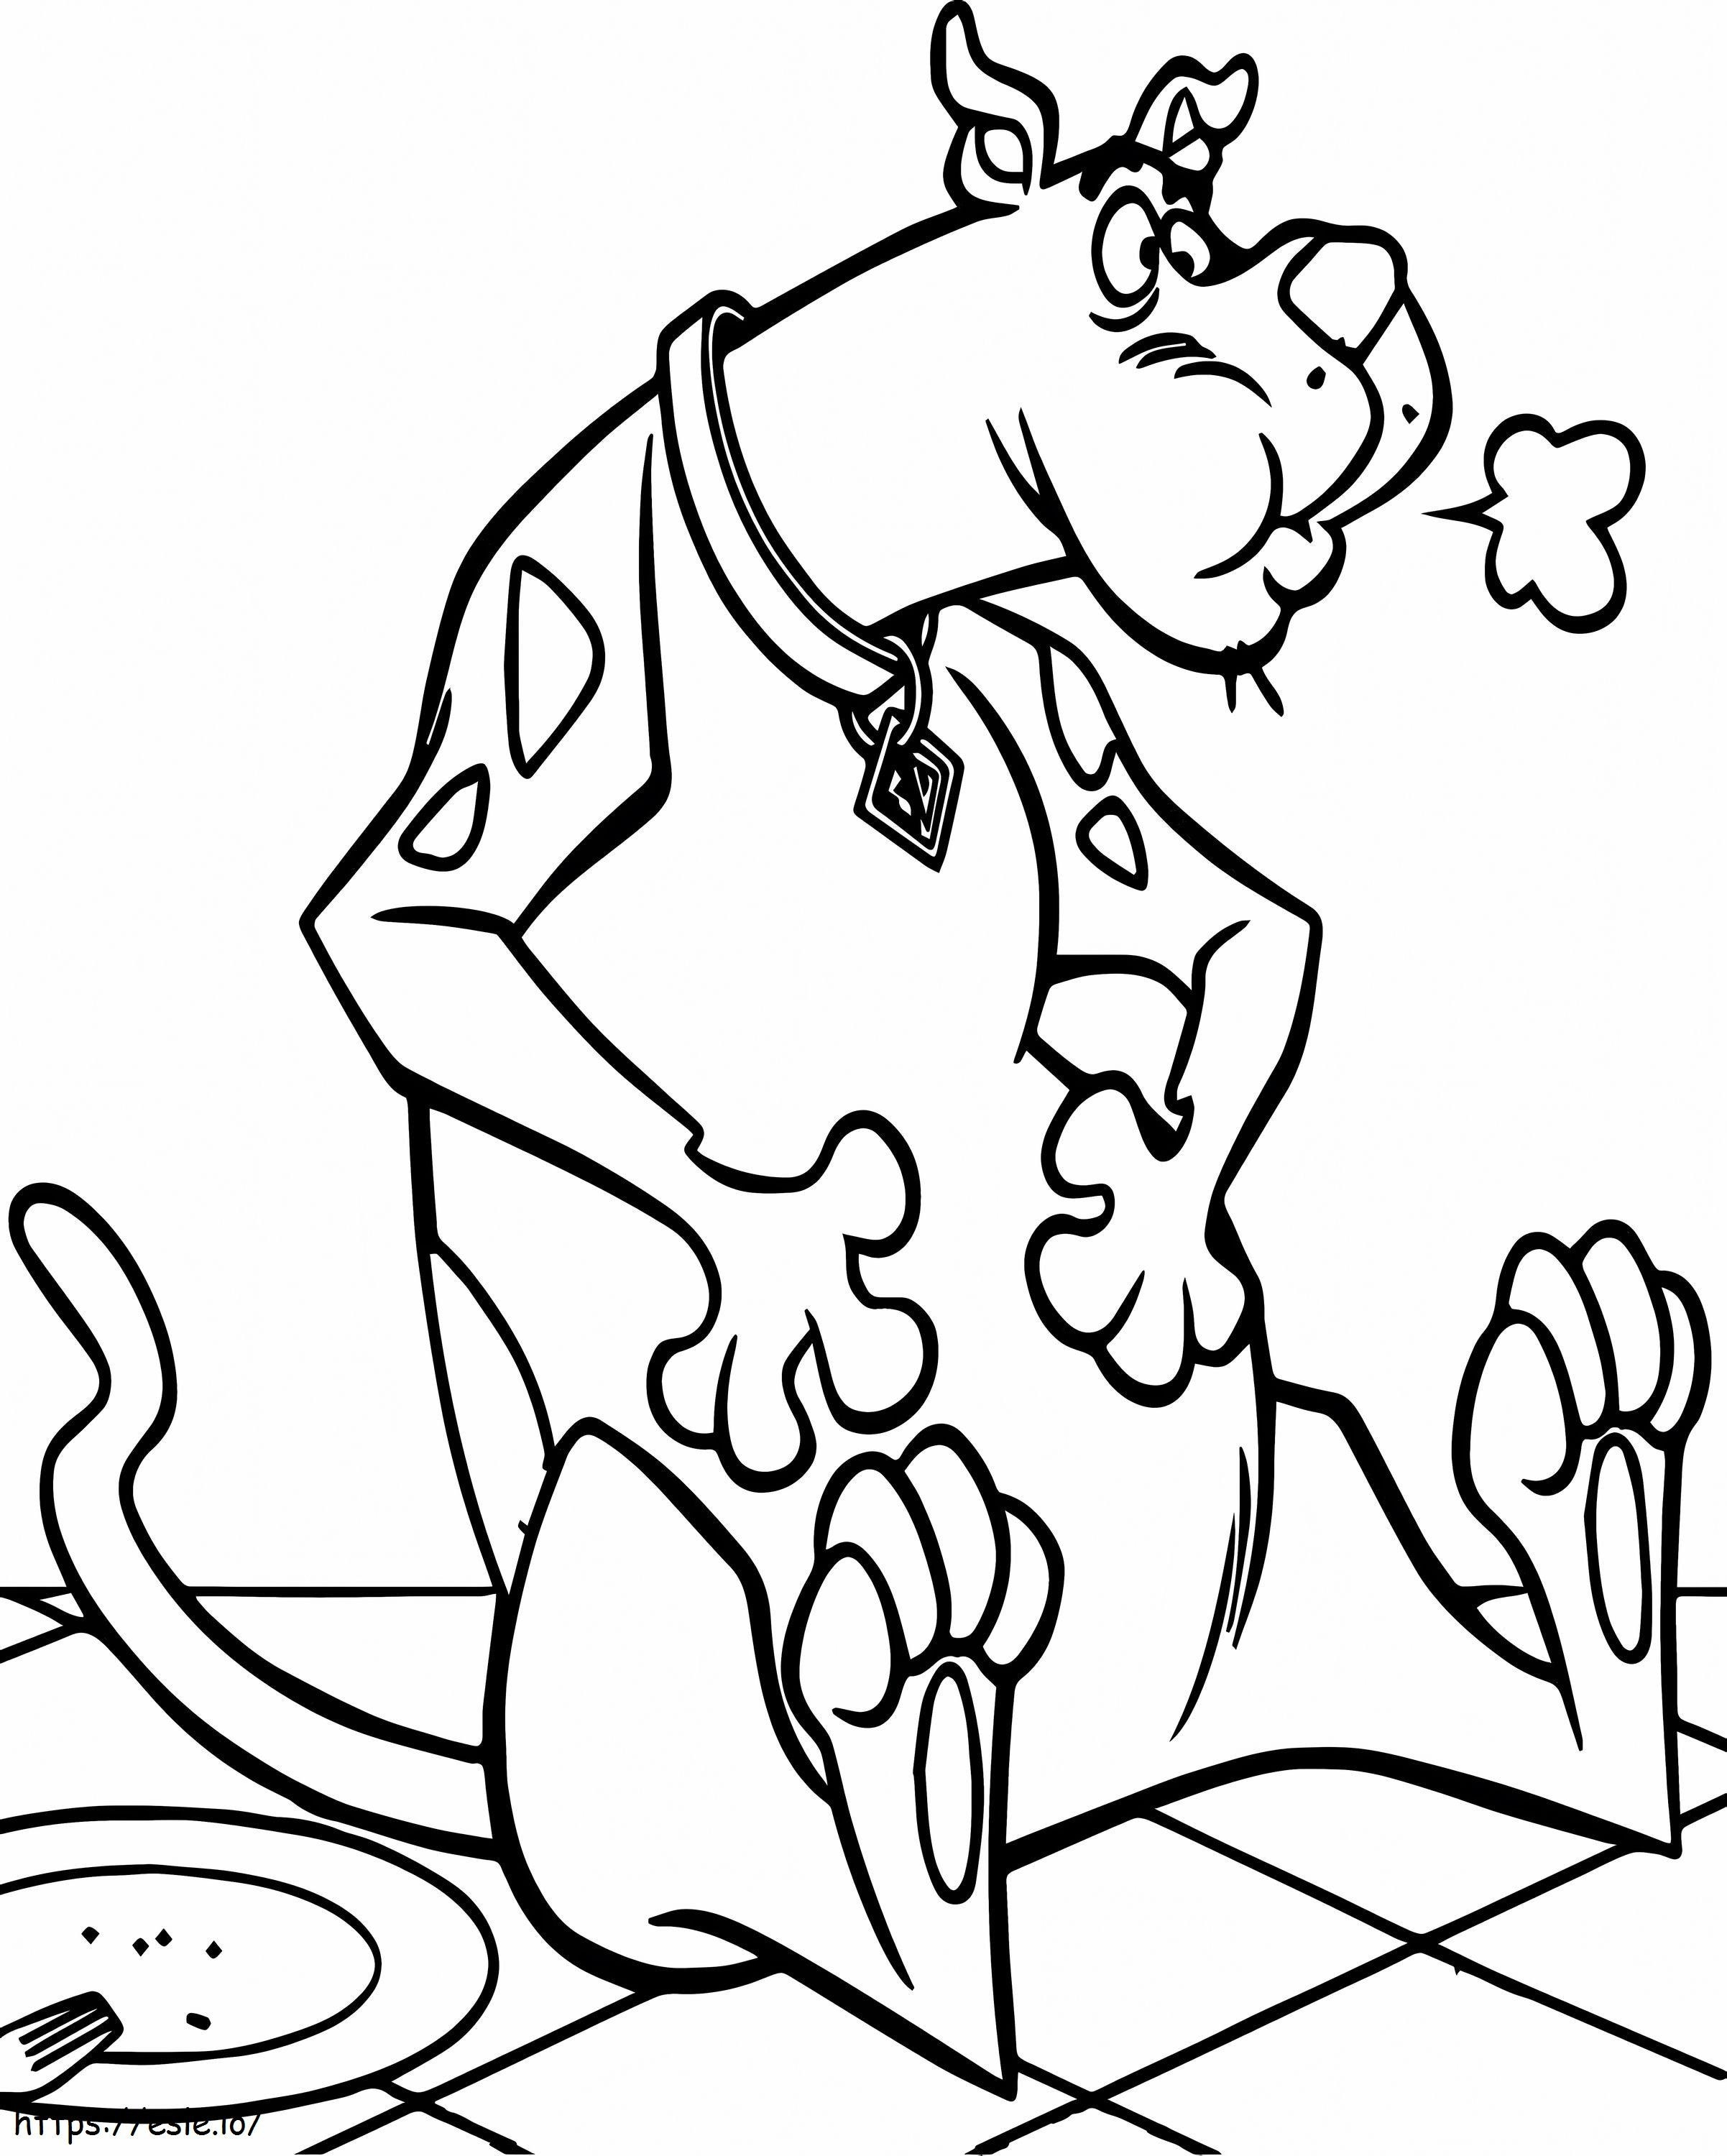 1539568188 Scooby Doo Pictures To Colour Best Scooby Doo New Scooby Doo Save Unique Of Scooby Doo Pictures To Colour coloring page